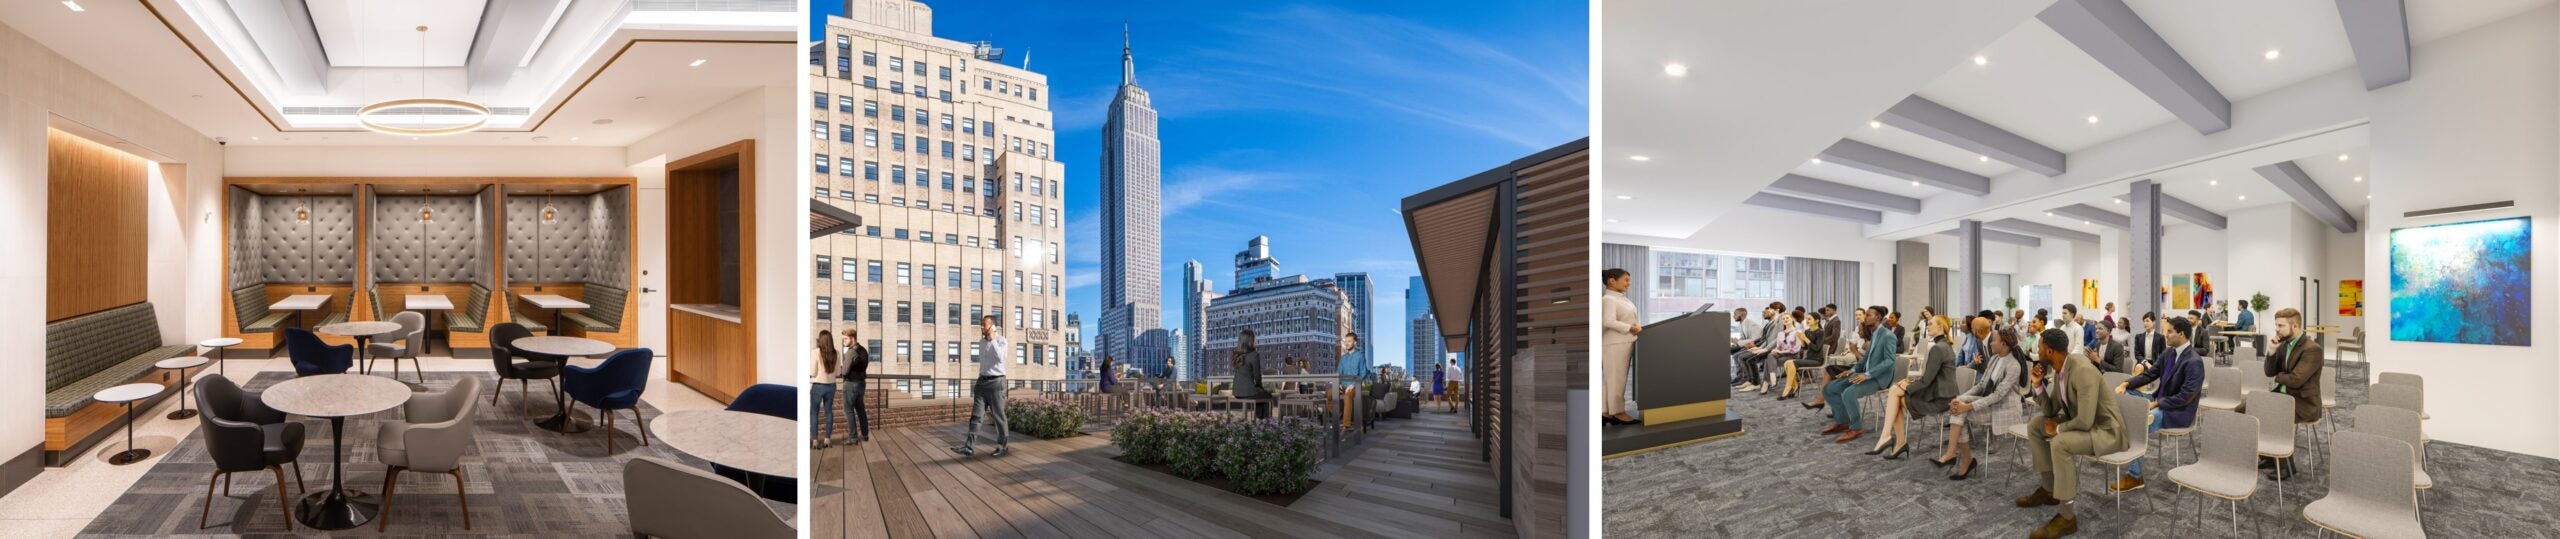 Empire State Realty Trust Announces Opening of New All-Hands Space at 1400 Broadway; Shares Plans for 7.4k Square Foot Rooftop at 1333 Broadway